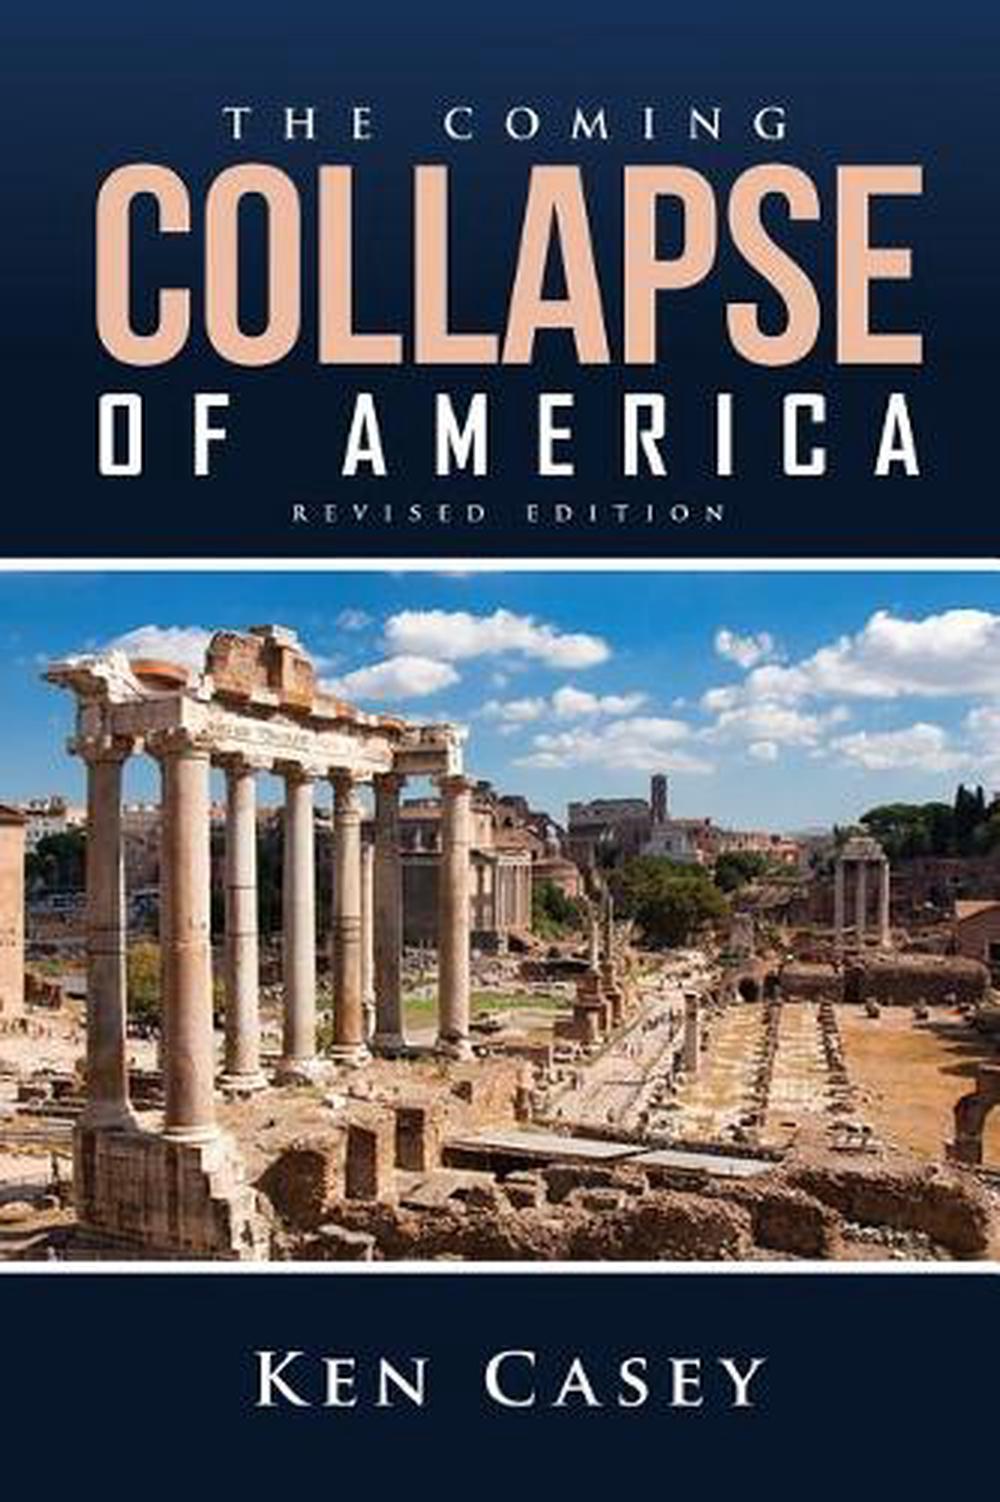 The Coming Collapse of America by Ken Casey (English) Paperback Book